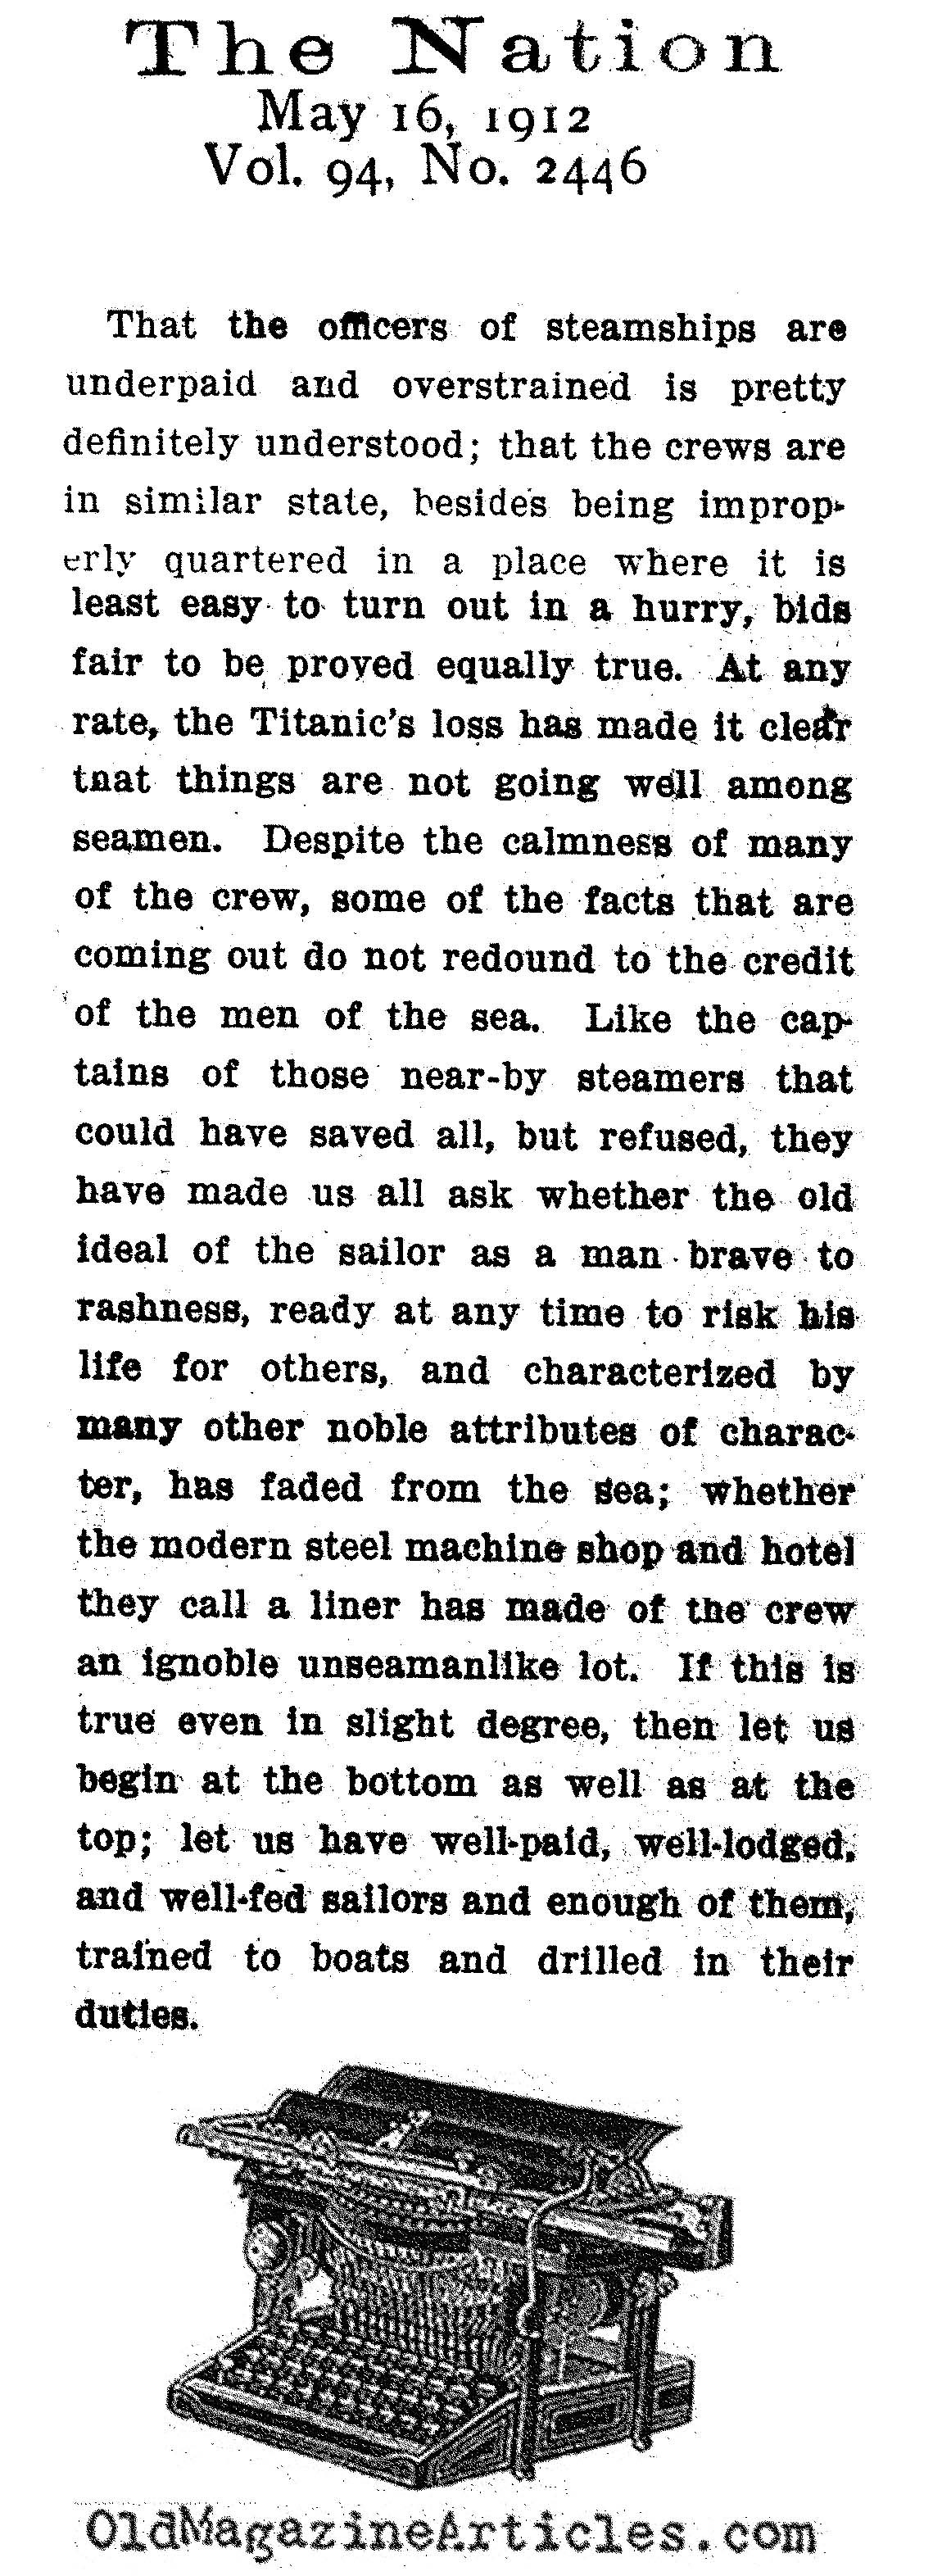 The <em>Titanic</em> Crew: Under-Drilled and Mediocre (The Nation, 1912)